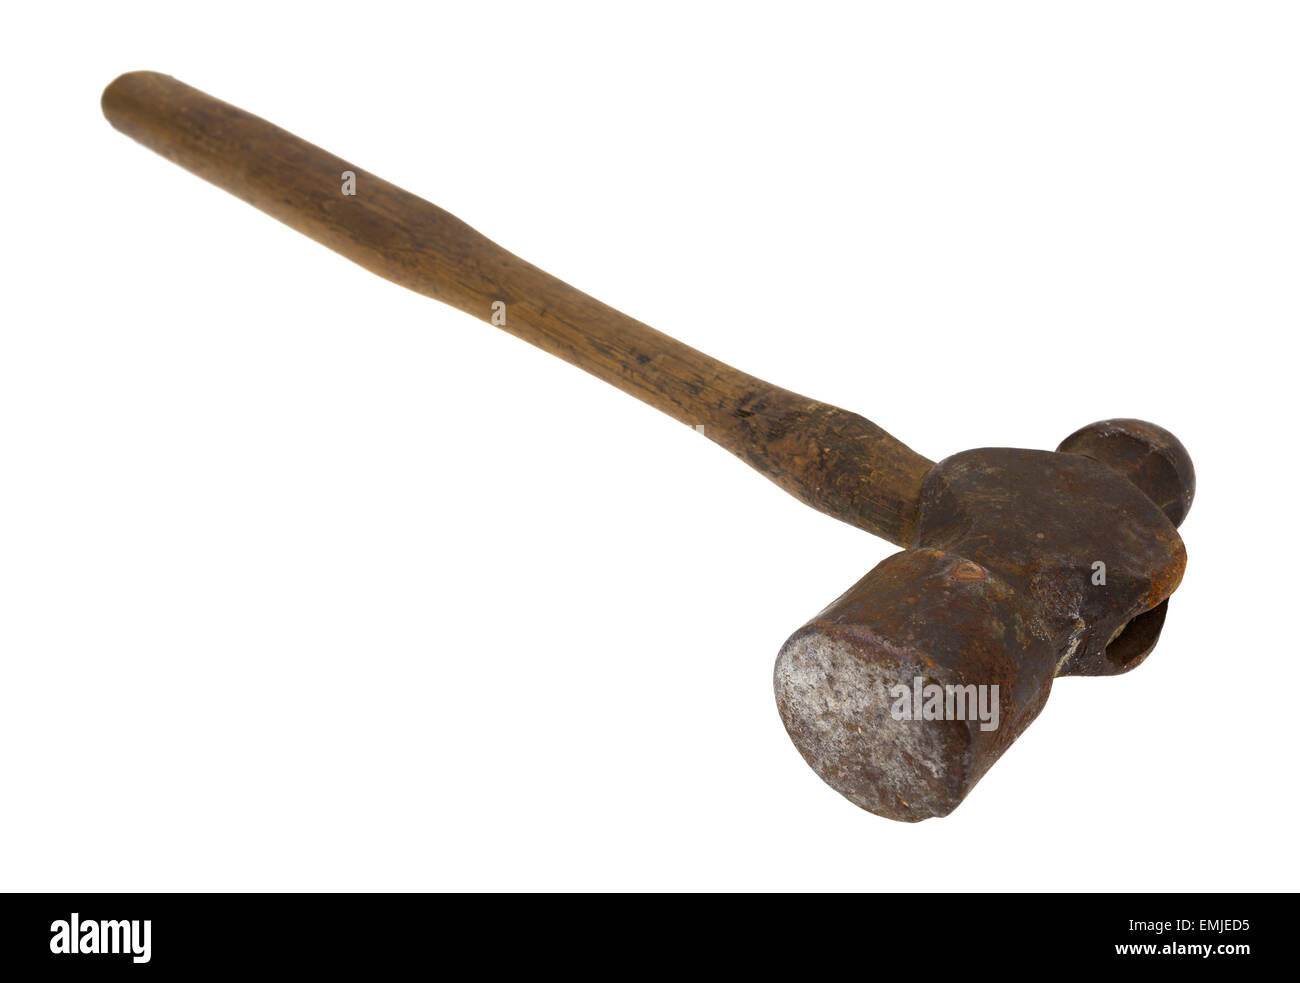 An old antique ball-peen hammer on a white background. Stock Photo